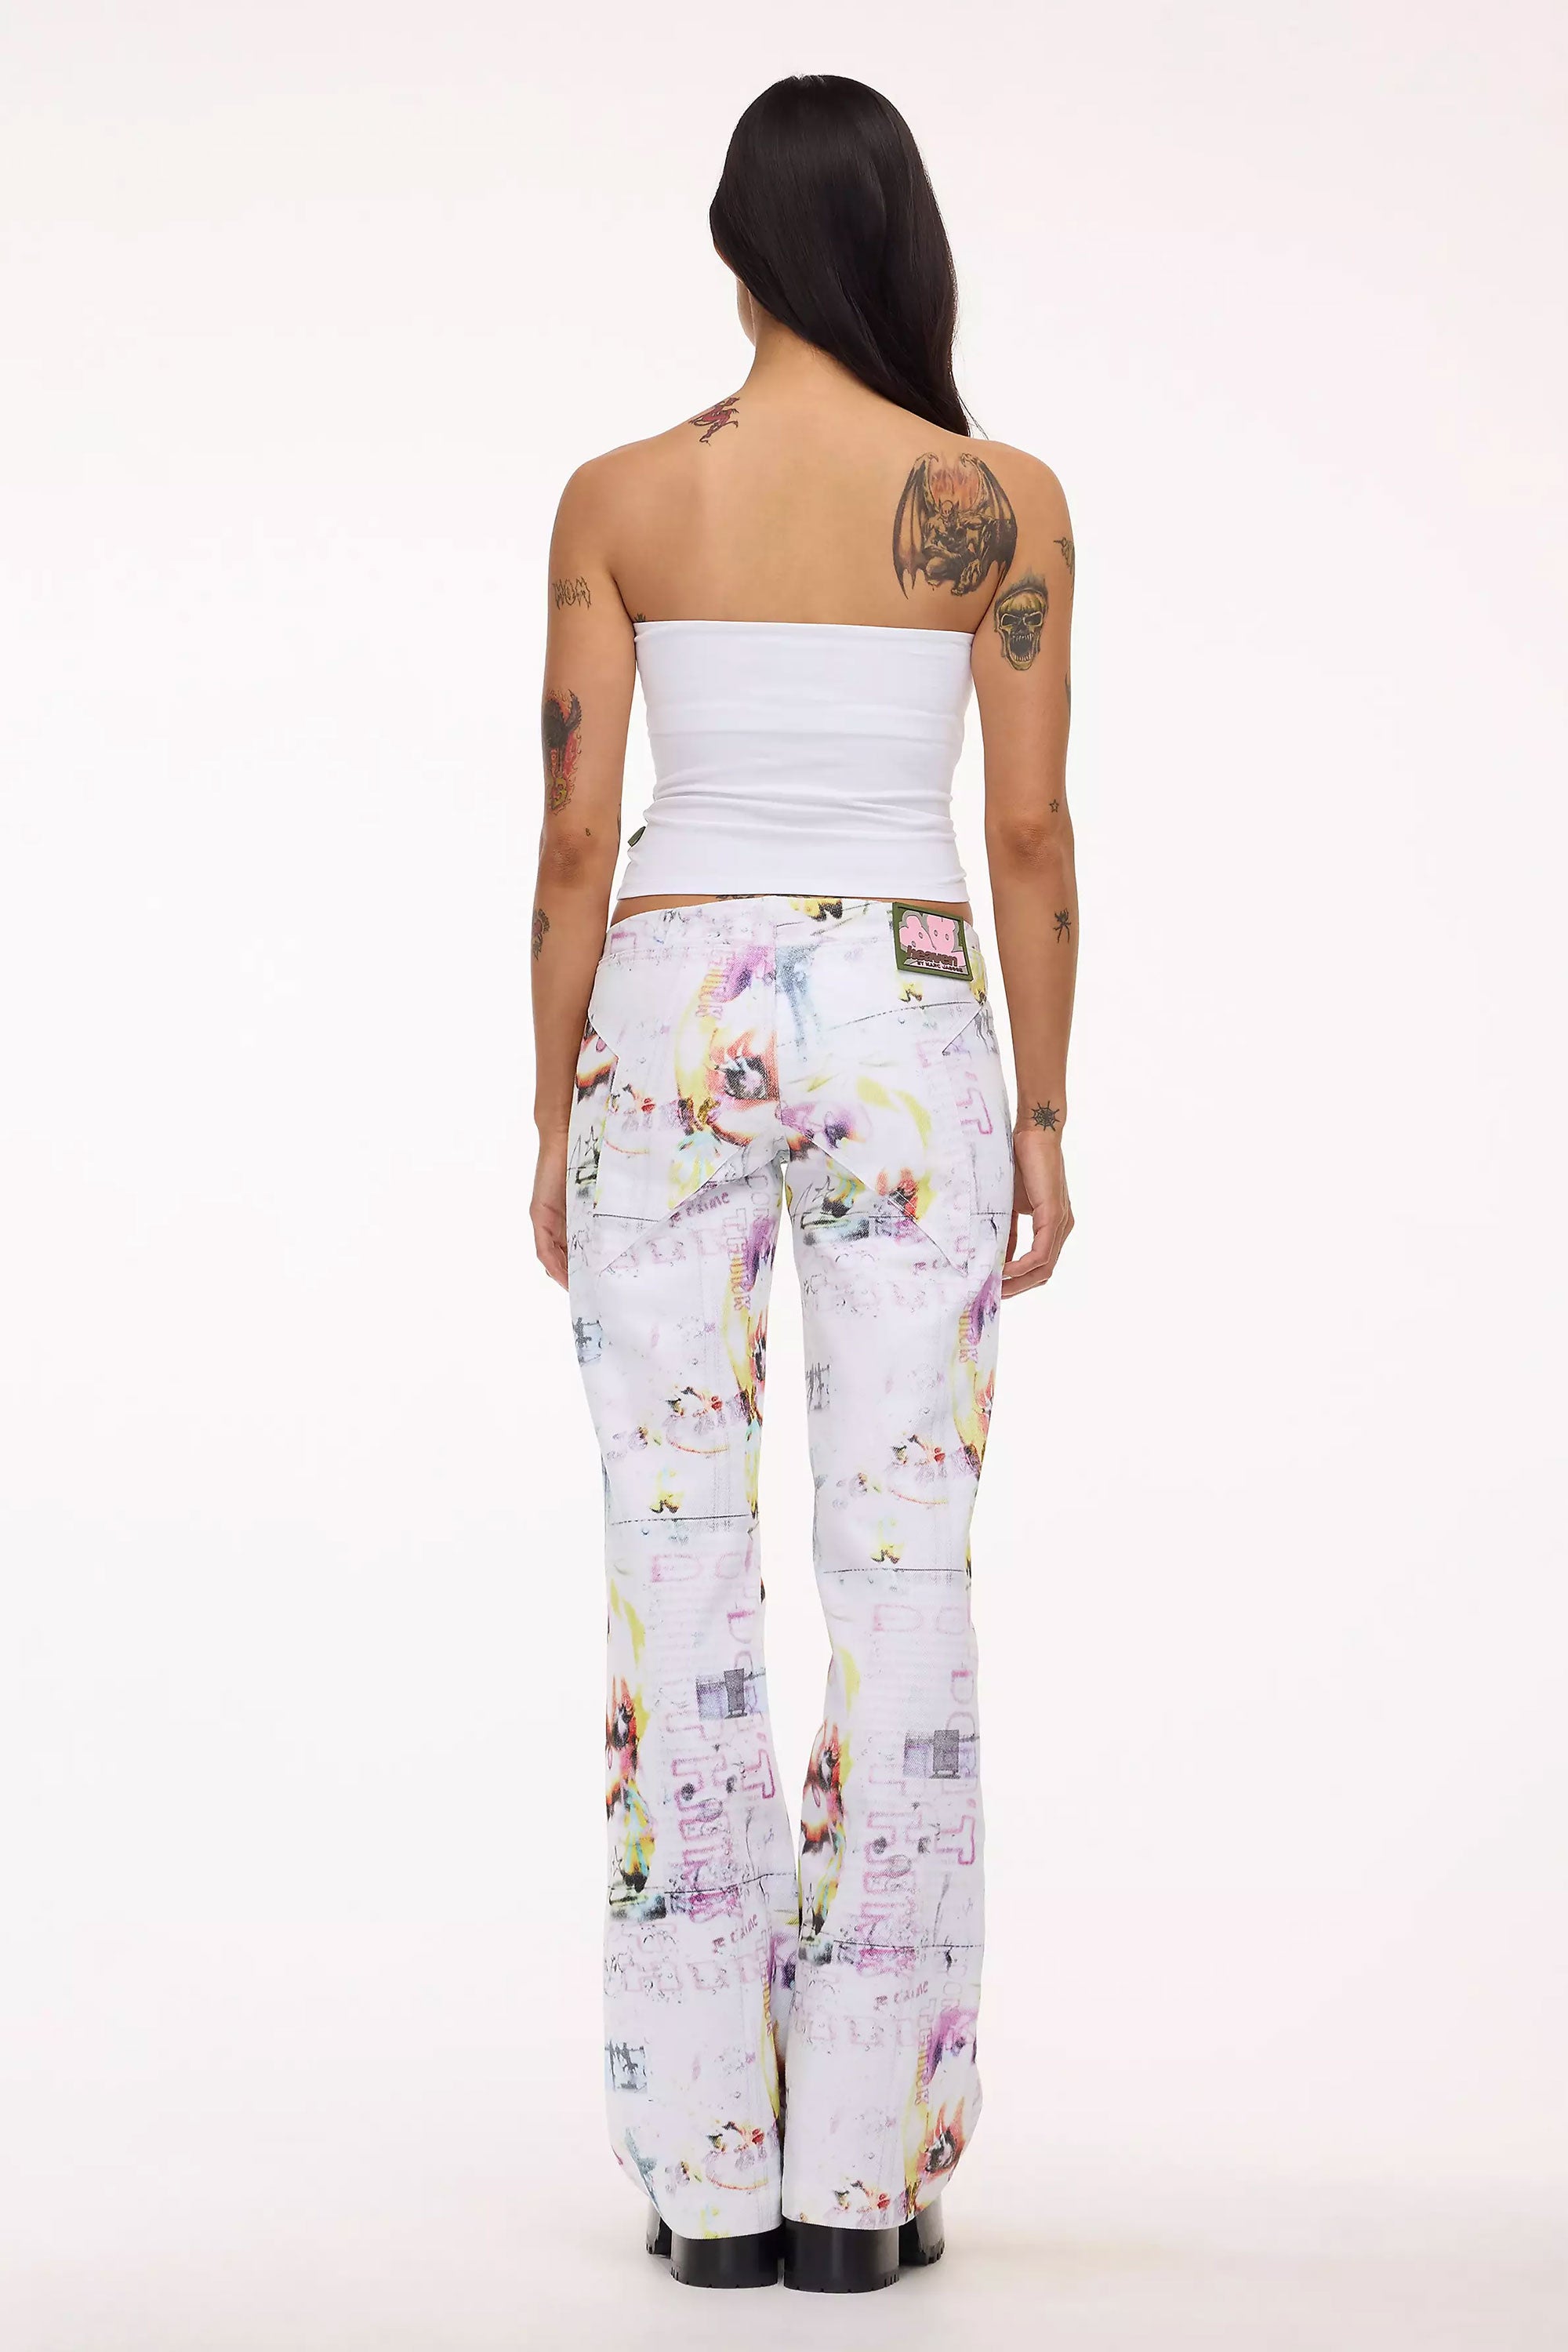 The HEAVEN - DON'T THINK FLARED STAR JEANS  available online with global shipping, and in PAM Stores Melbourne and Sydney.